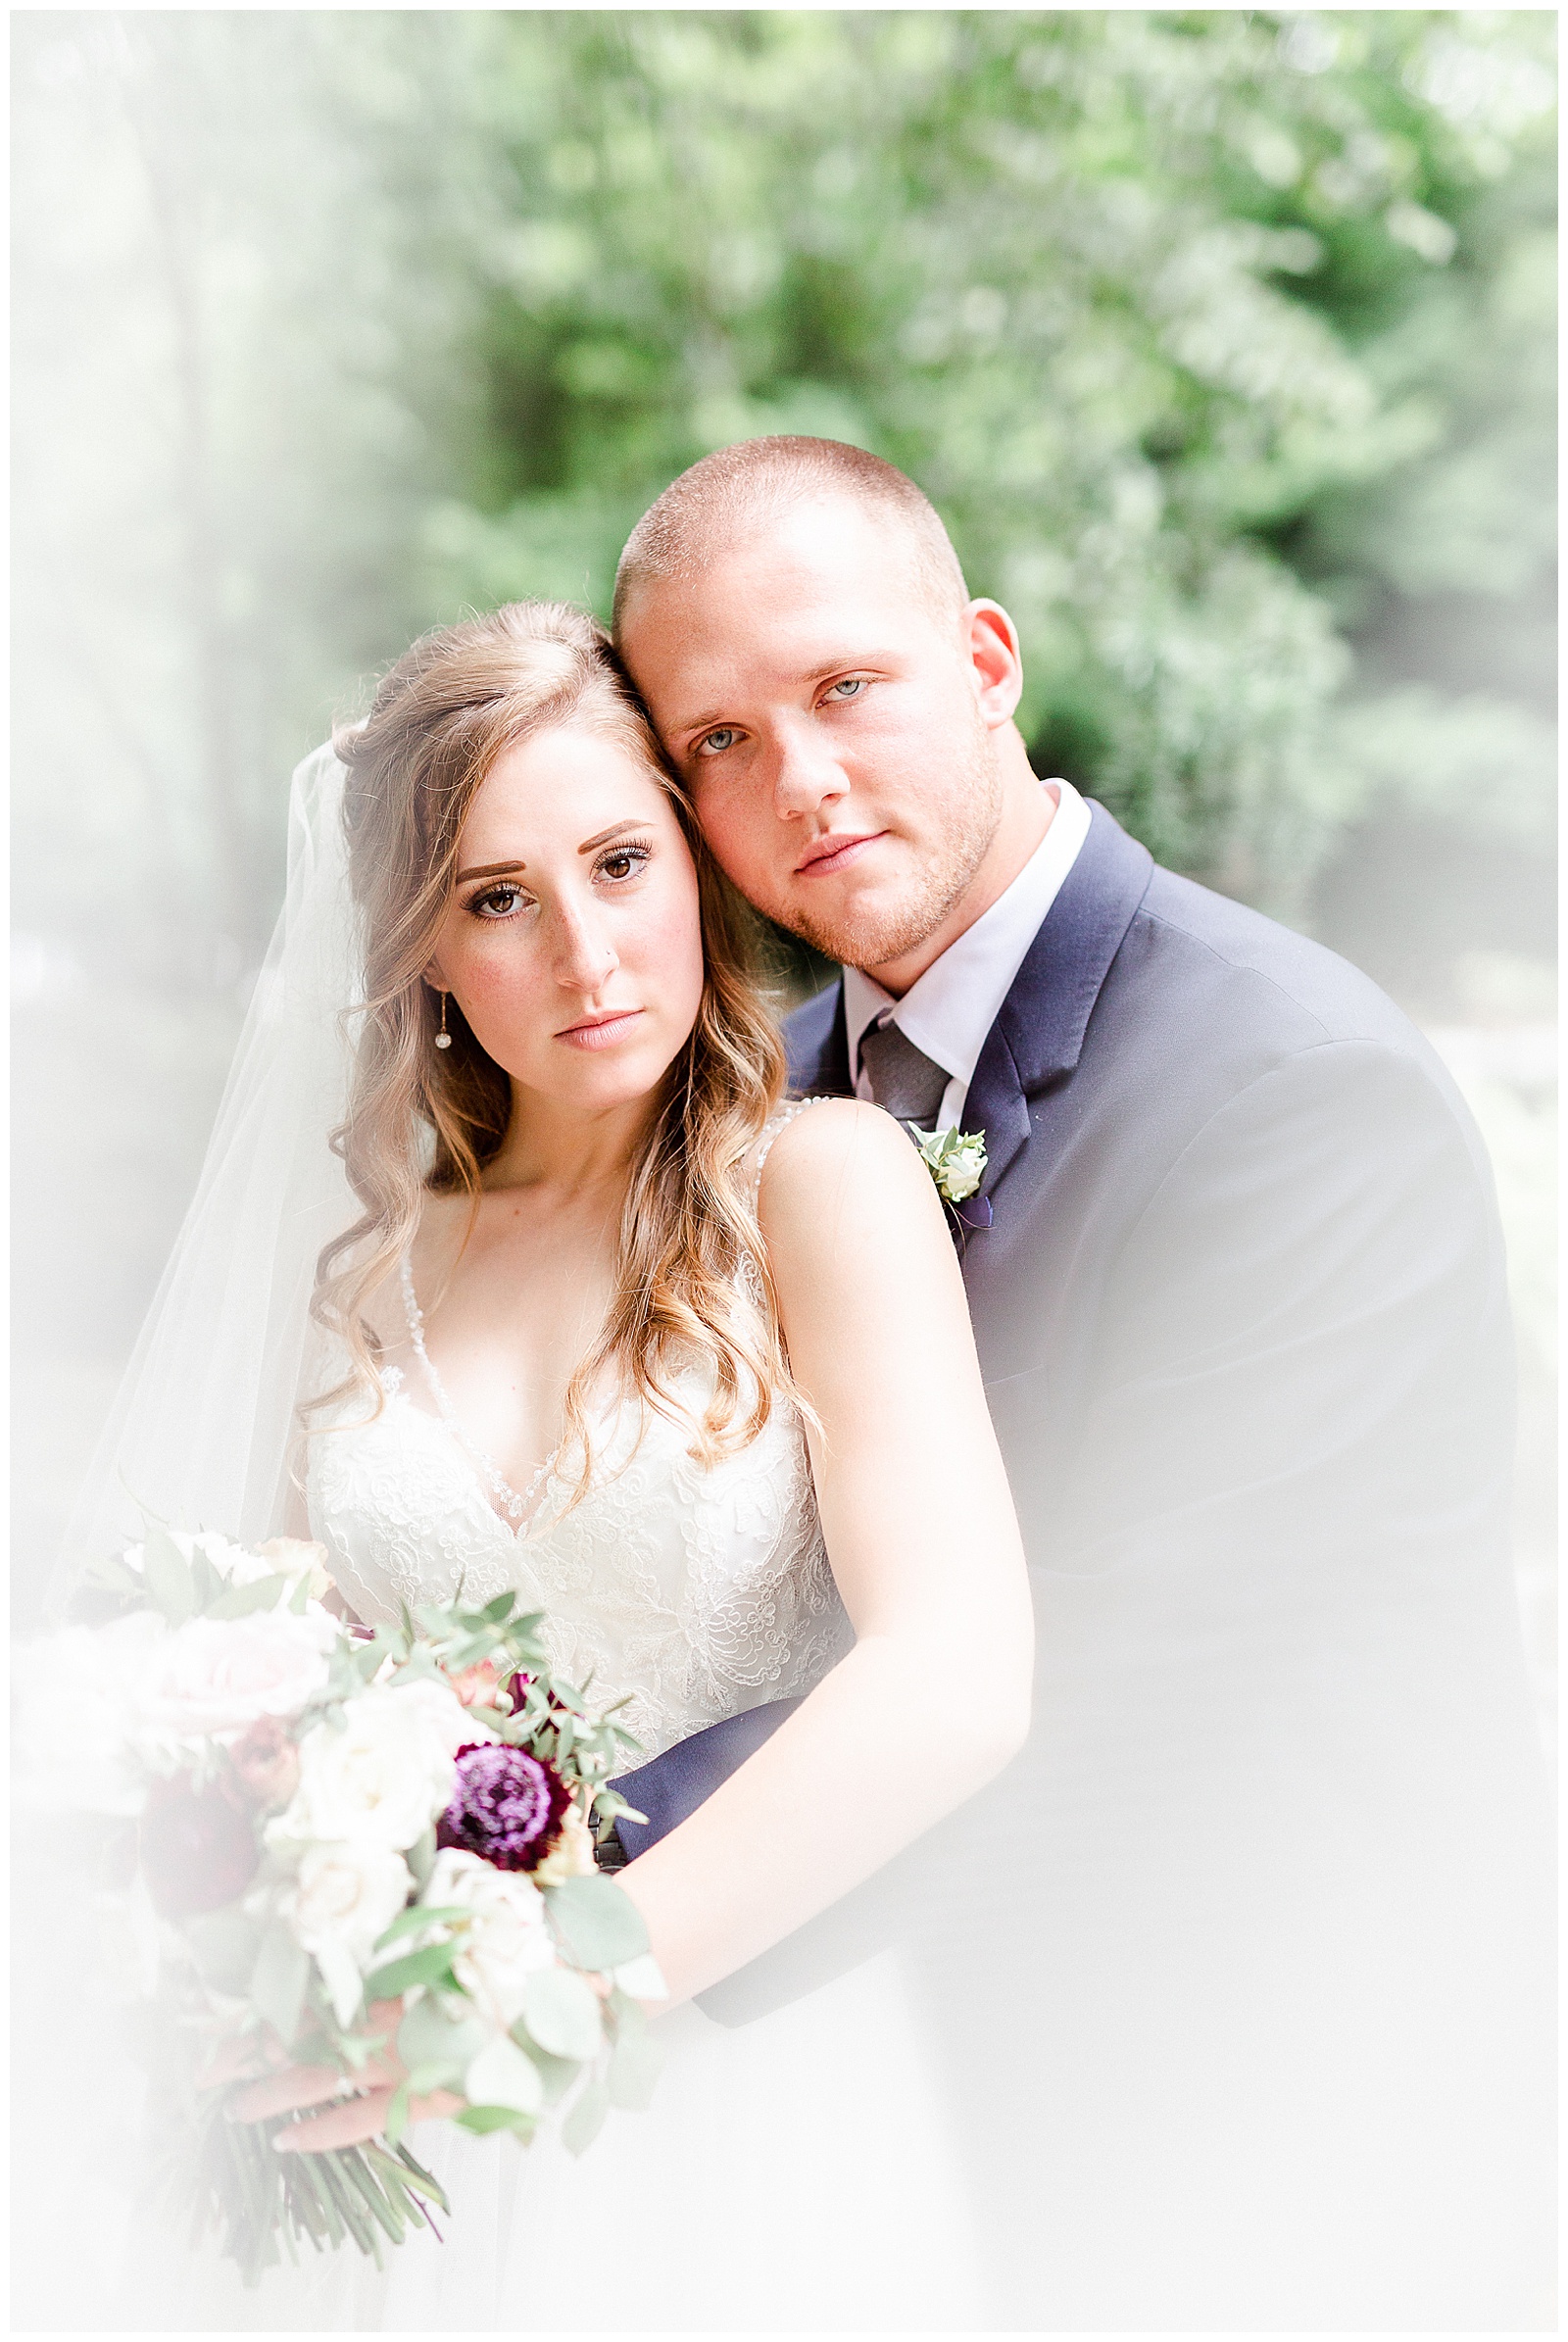 Stunning Serious Model Photos of Gorgeous Bride in Simple V-Neck Lace wedding dress and dapper groom in gray-blue suit from Elegant Modern Summer Wedding in Charlotte, NC | check out the full wedding at KevynDixonPhoto.com